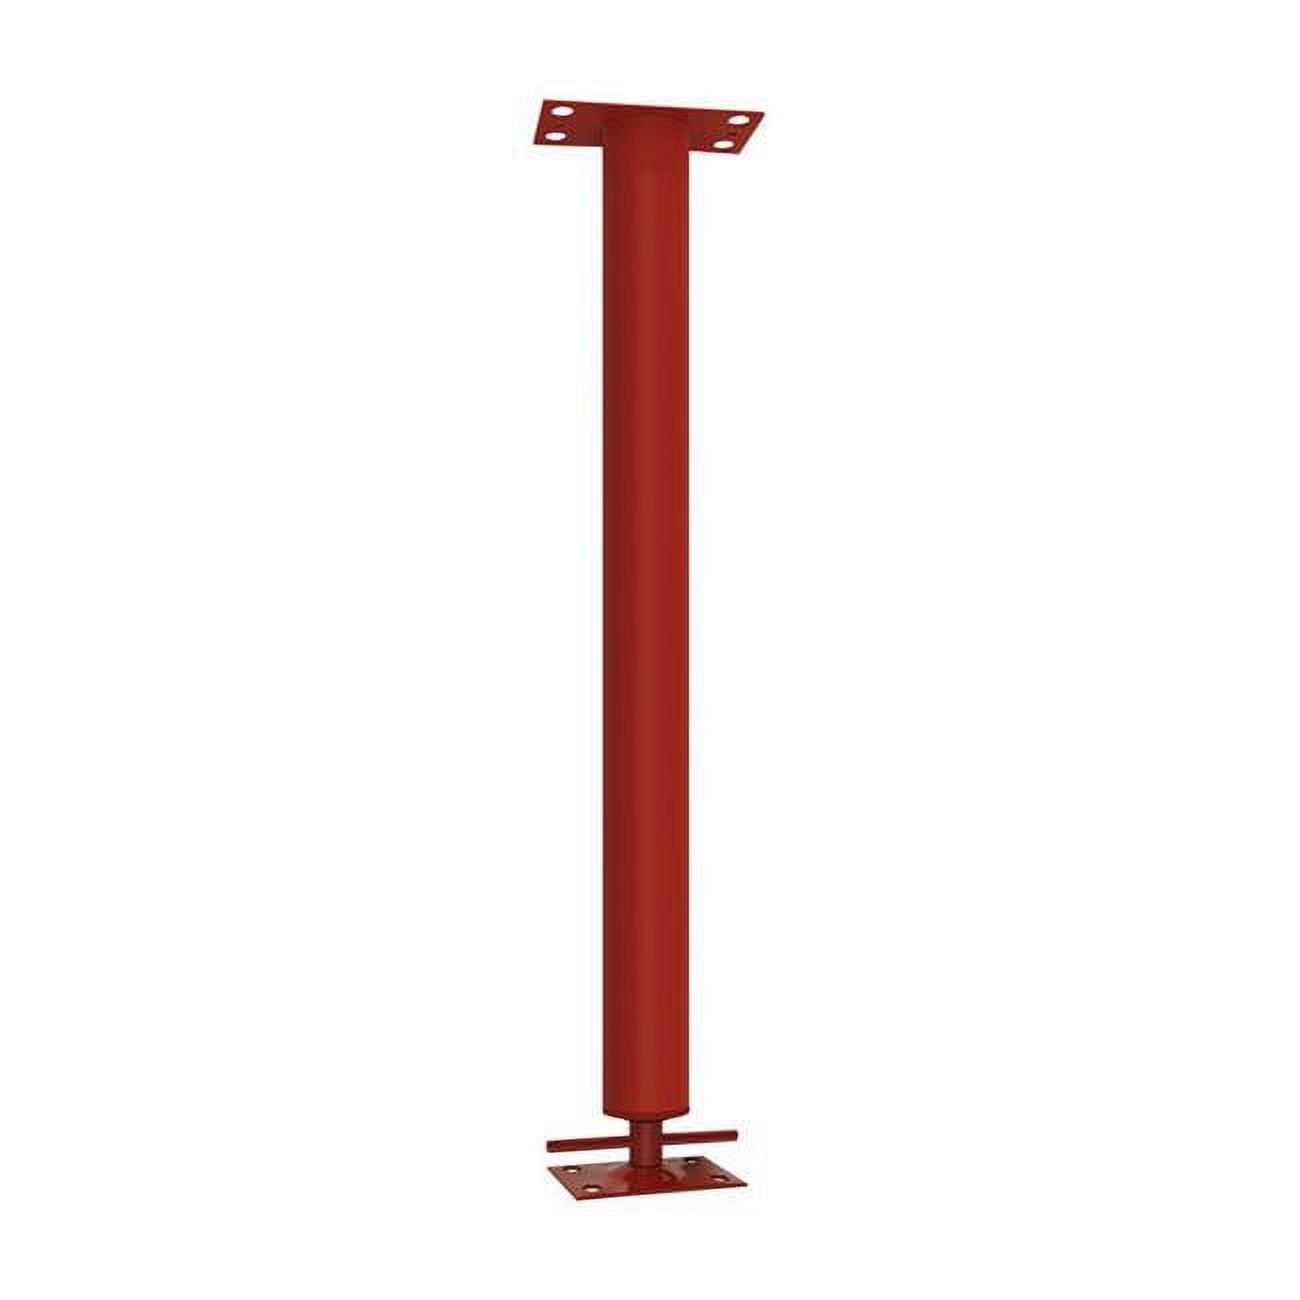 5007296 3 Dia. X 16 In. Adjustable Building Support Column - 24700 Lbs